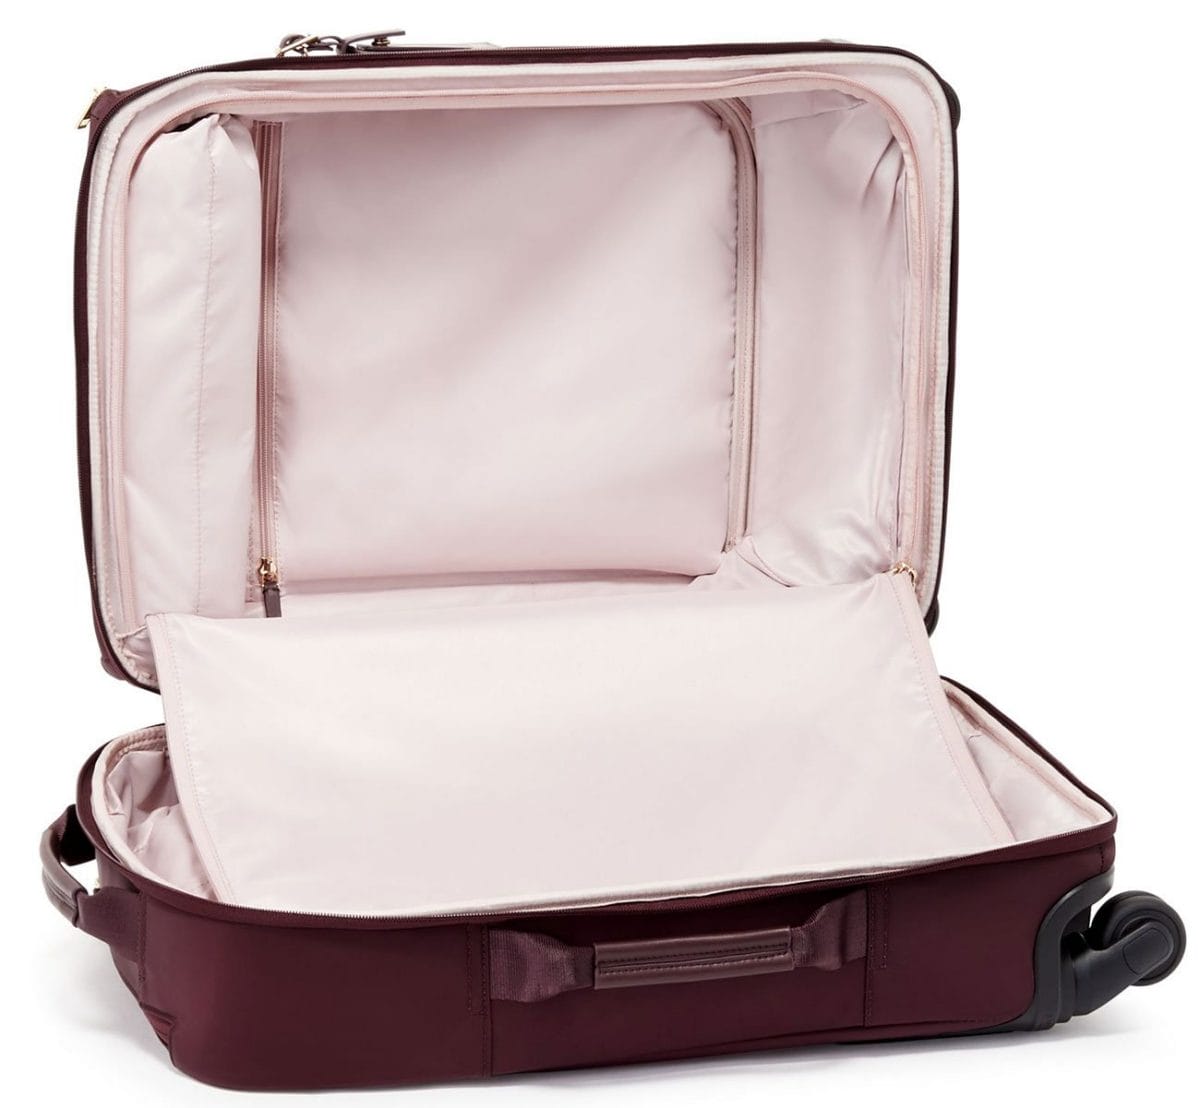 Tumi Voyageur Léger International Carry-On - Beetroot - Irv’s Luggage